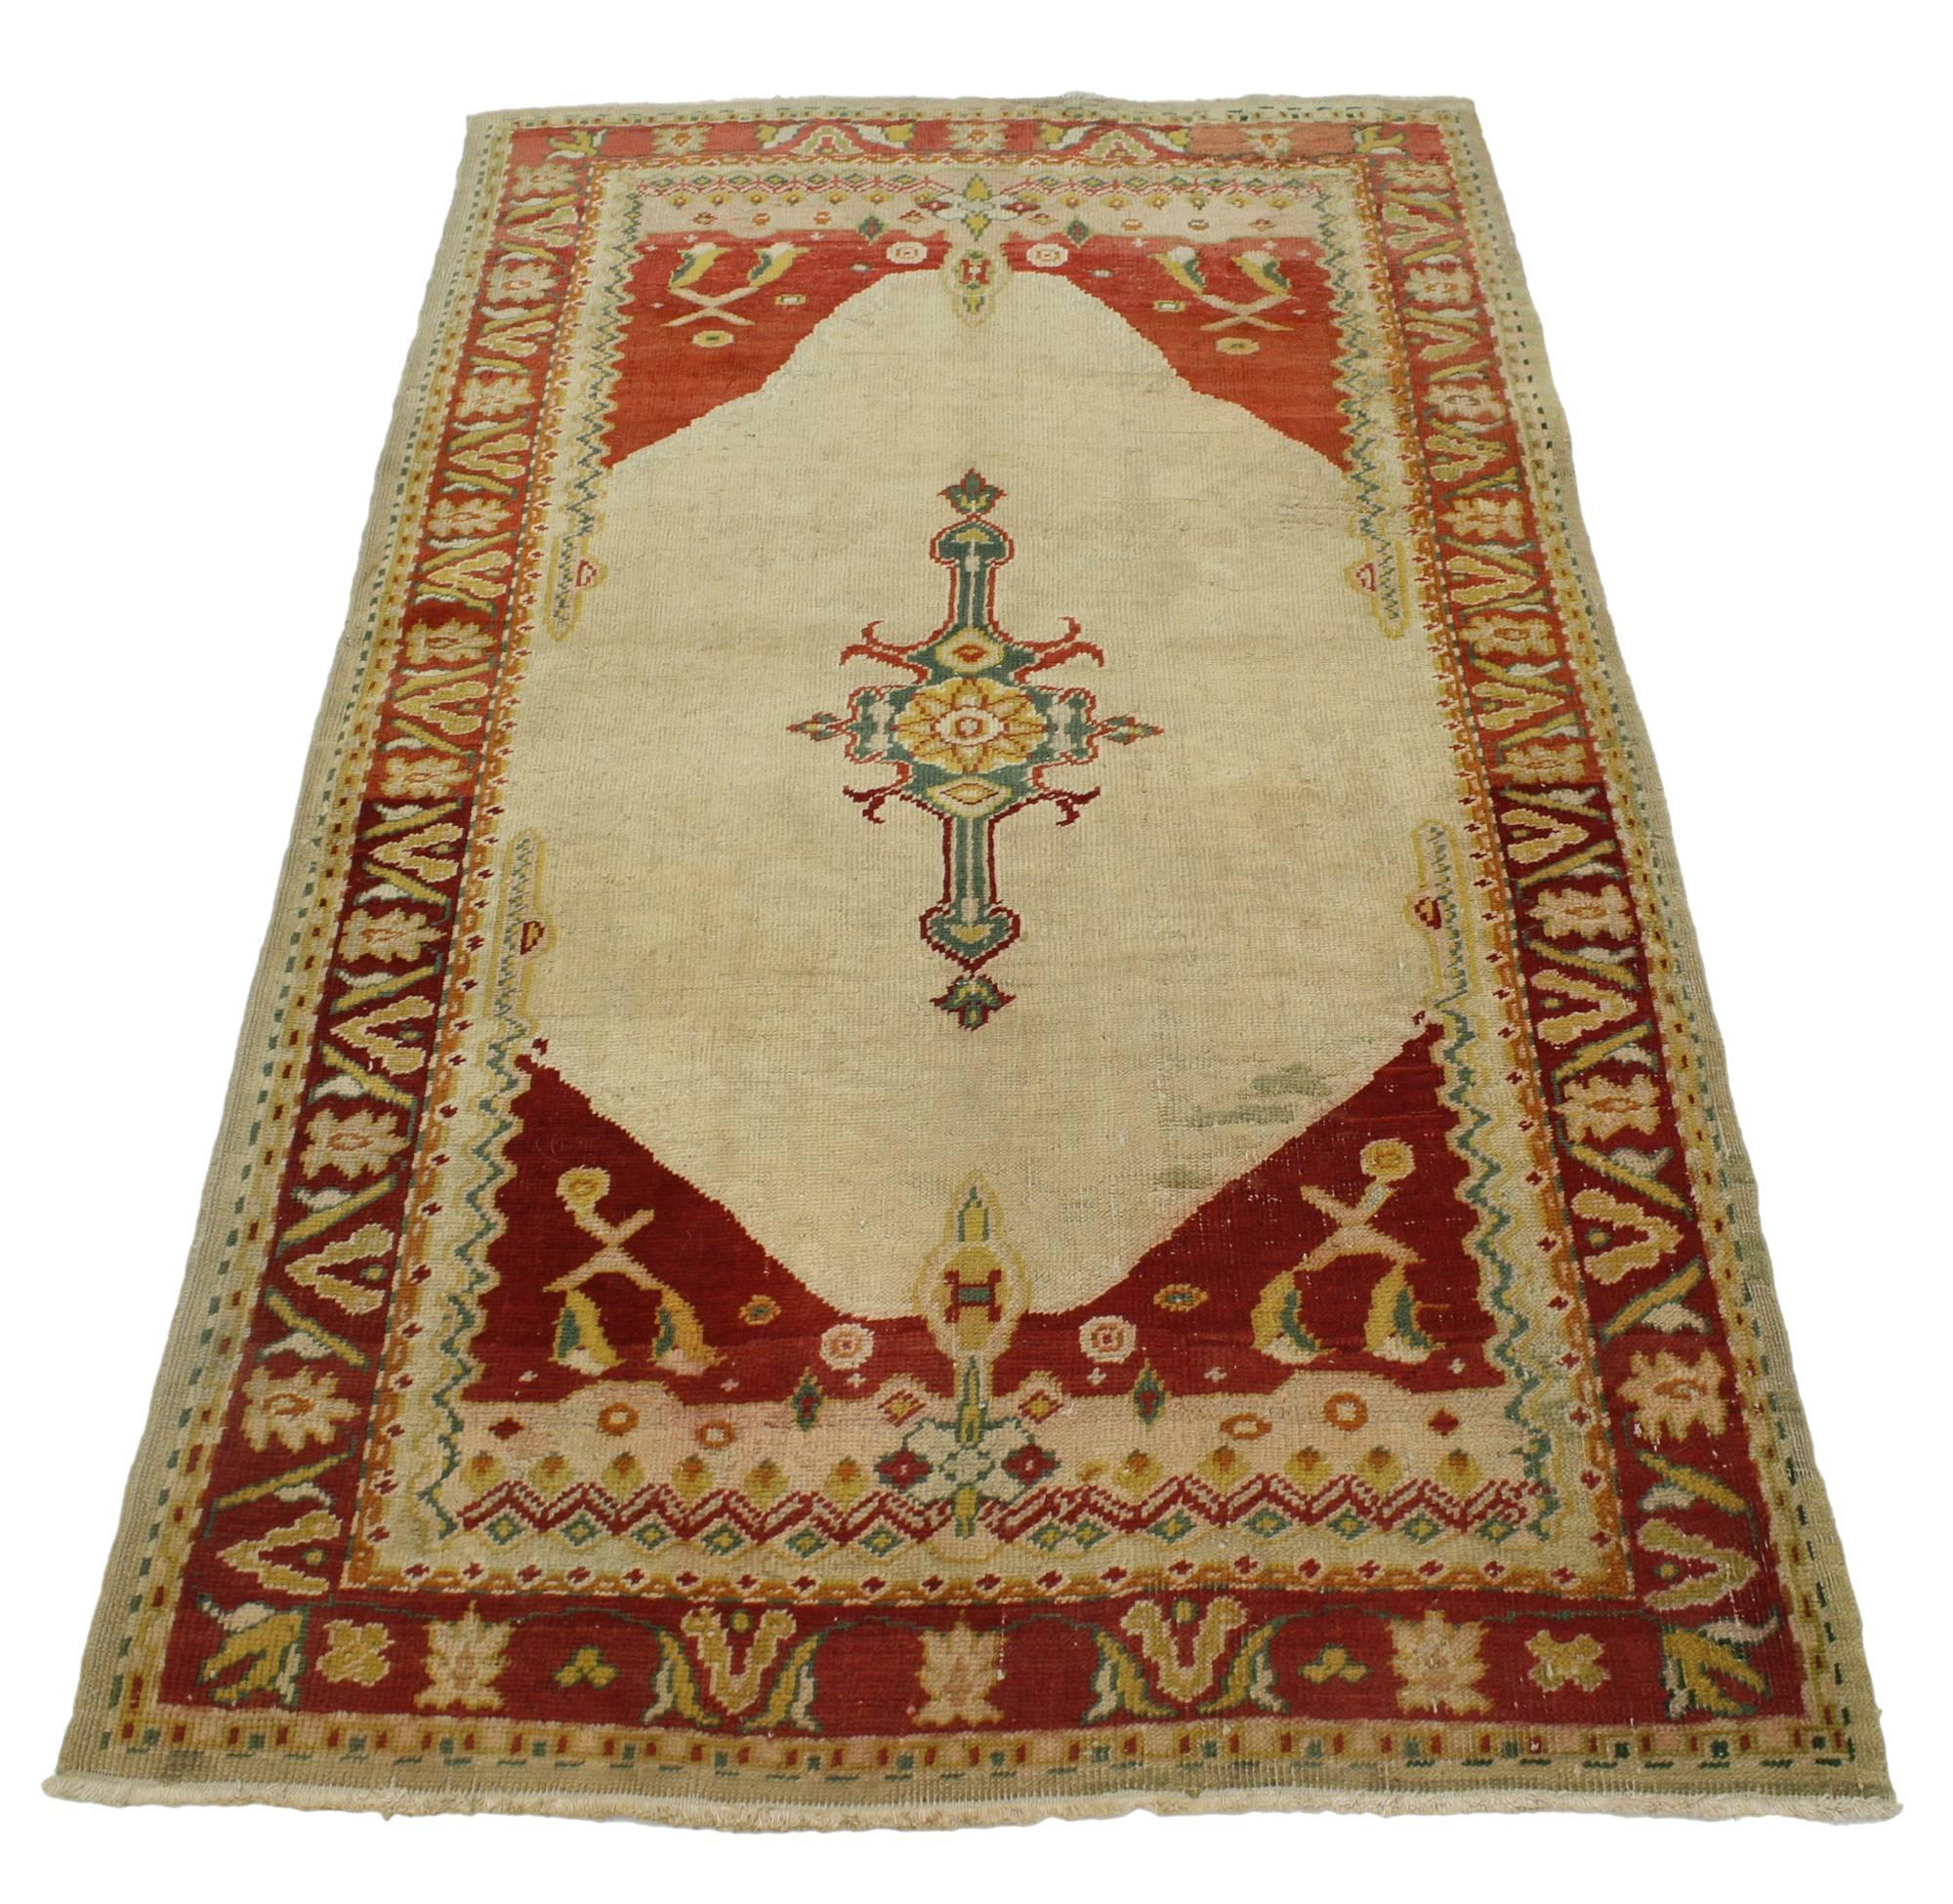 76896, vintage Turkish Oushak accent rug. This beautifully executed vintage Turkish Oushak rug features a central amulet cruciform style medallion in teal centered with a saffron star lined in contrasting red. Red spandrels and border are patterned